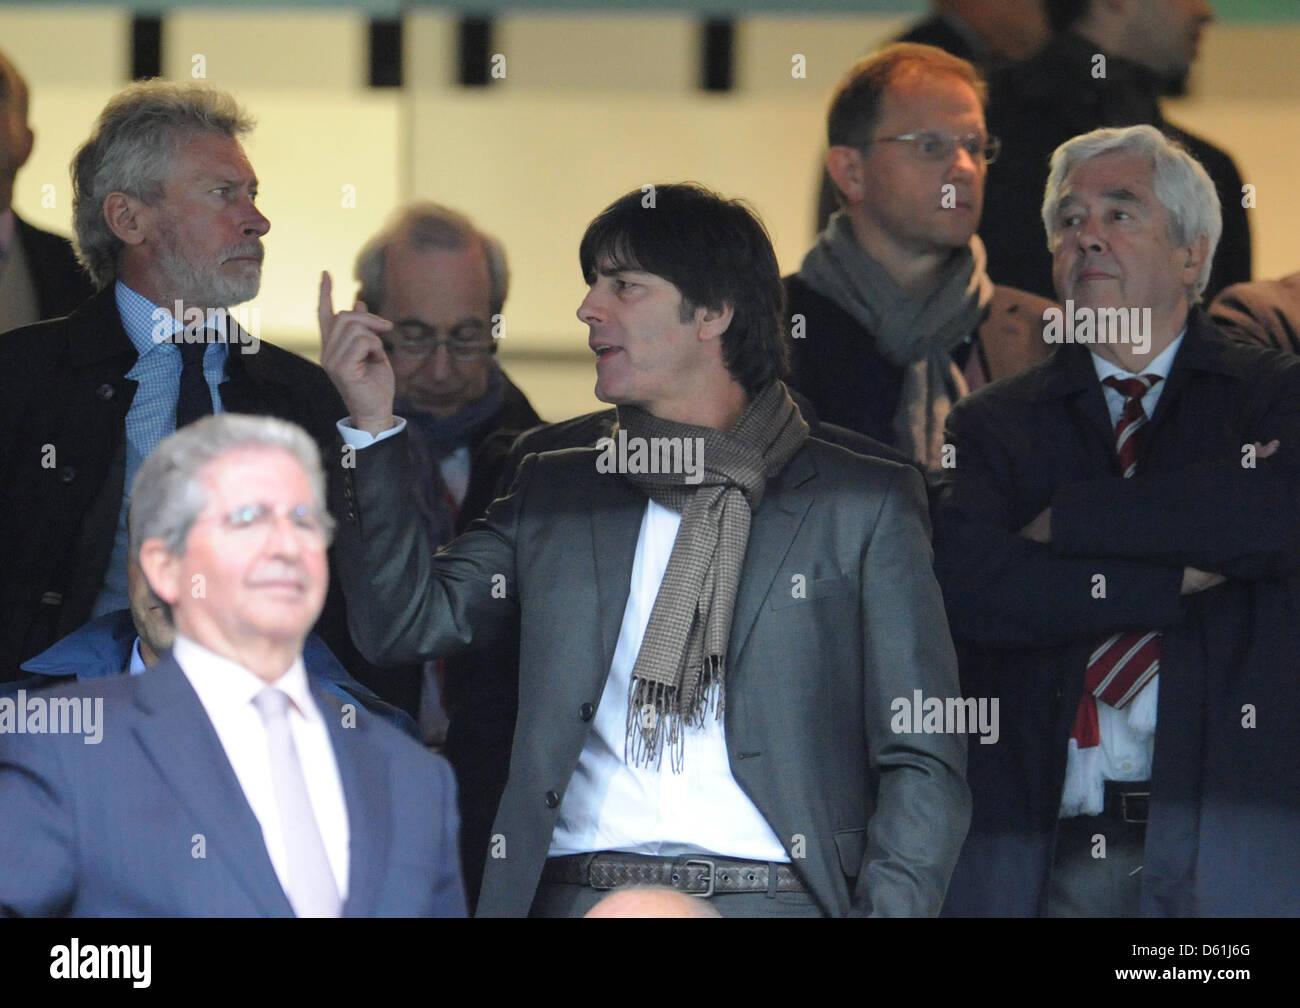 Joachim Loew (C), head coach of the german national football team, talks to former soccer player Paul Breitner (L) on the stand during the Champions League semi final second leg soccer match between Real Madrid and FC Bayern Munich at the Santiago Bernabeu stadium in Madrid, Spain, 25 April 2012. Photo: Andreas Gebert dpa  +++(c) dpa - Bildfunk+++ Stock Photo